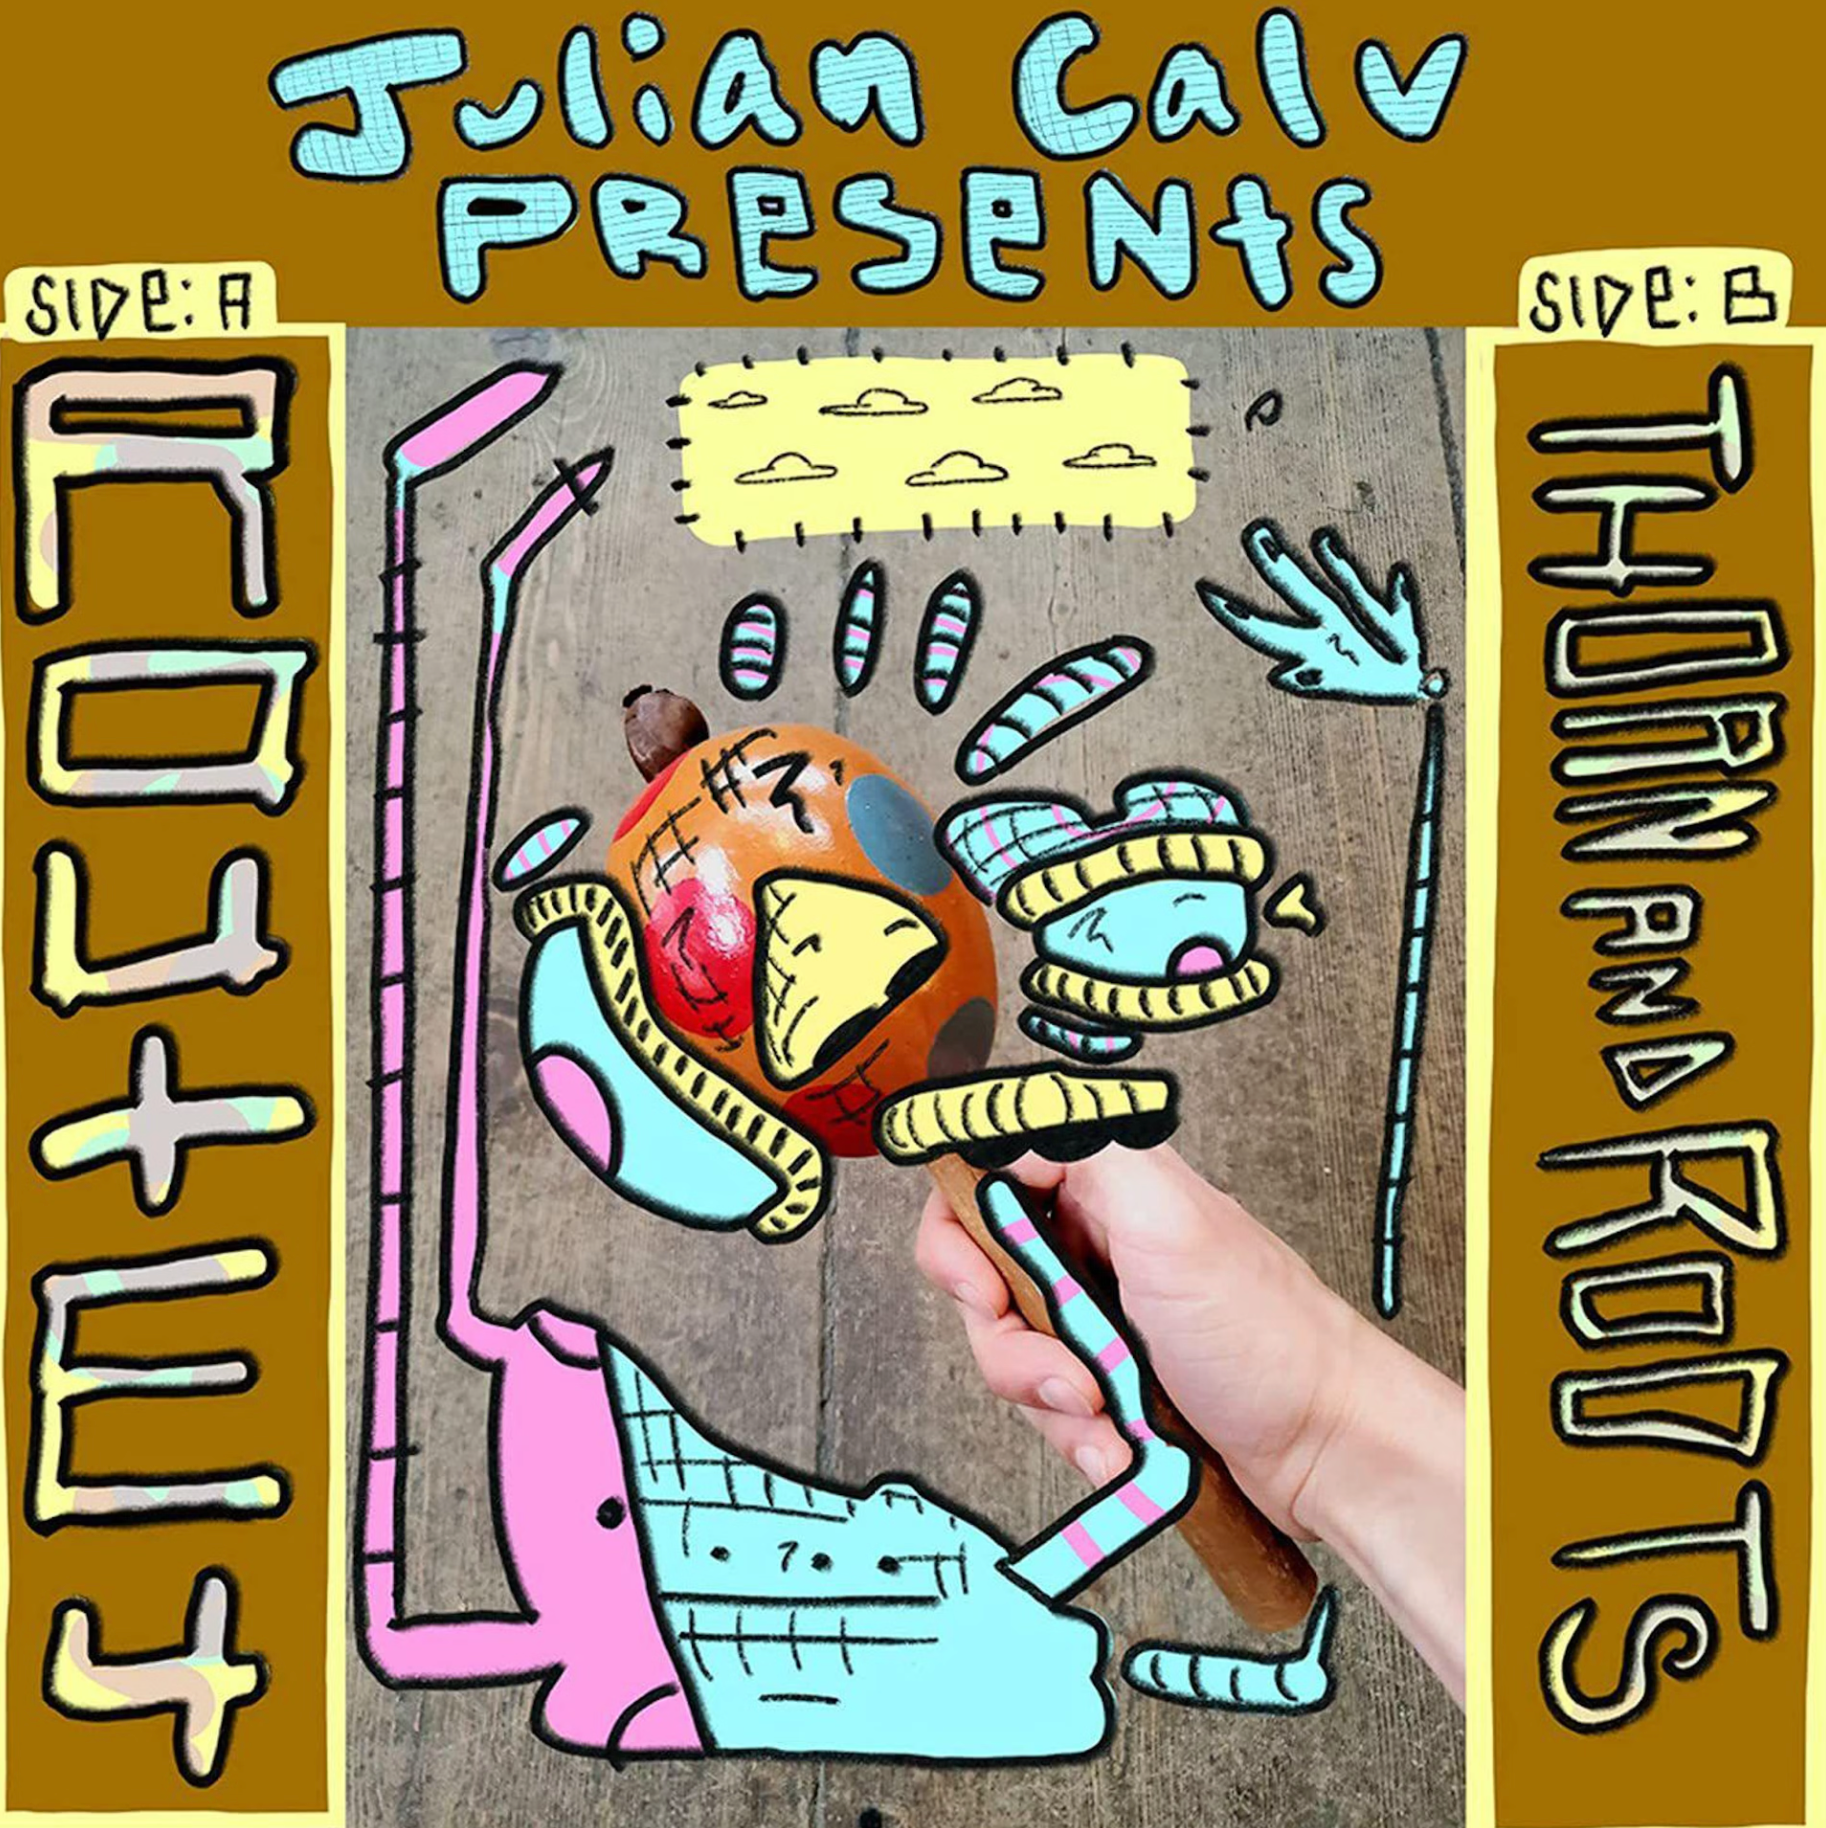 Julian Calv - Route 4 / Thorn and Roots [7"]